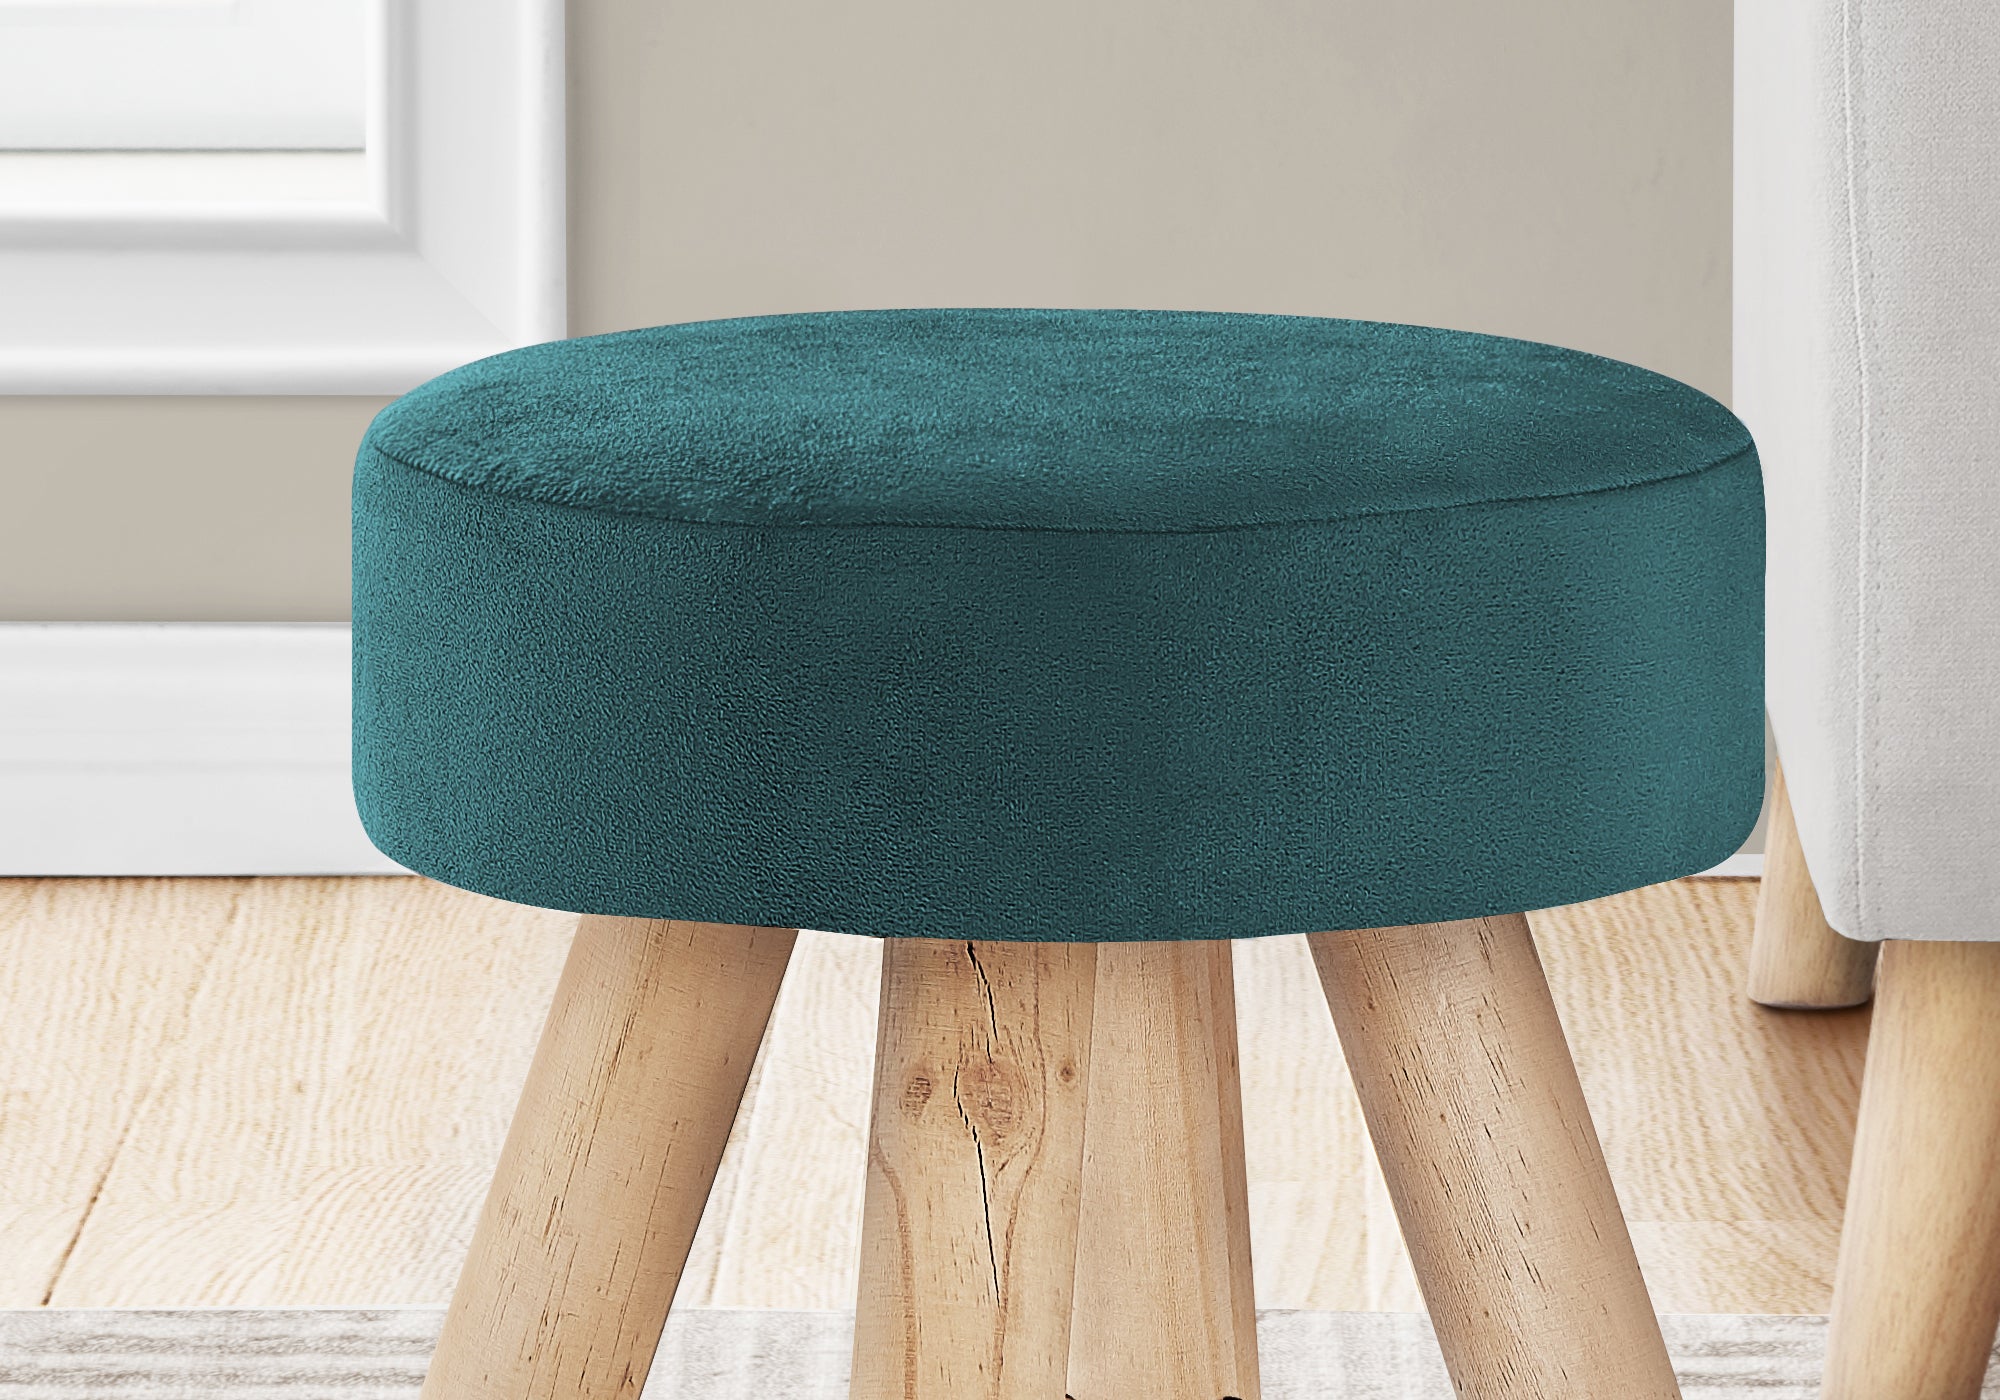 MN-249009    Ottoman, Pouf, Footrest, Foot Stool, 12" Round, Velvet Fabric, Wood Legs, Turquoise, Natural, Contemporary, Modern